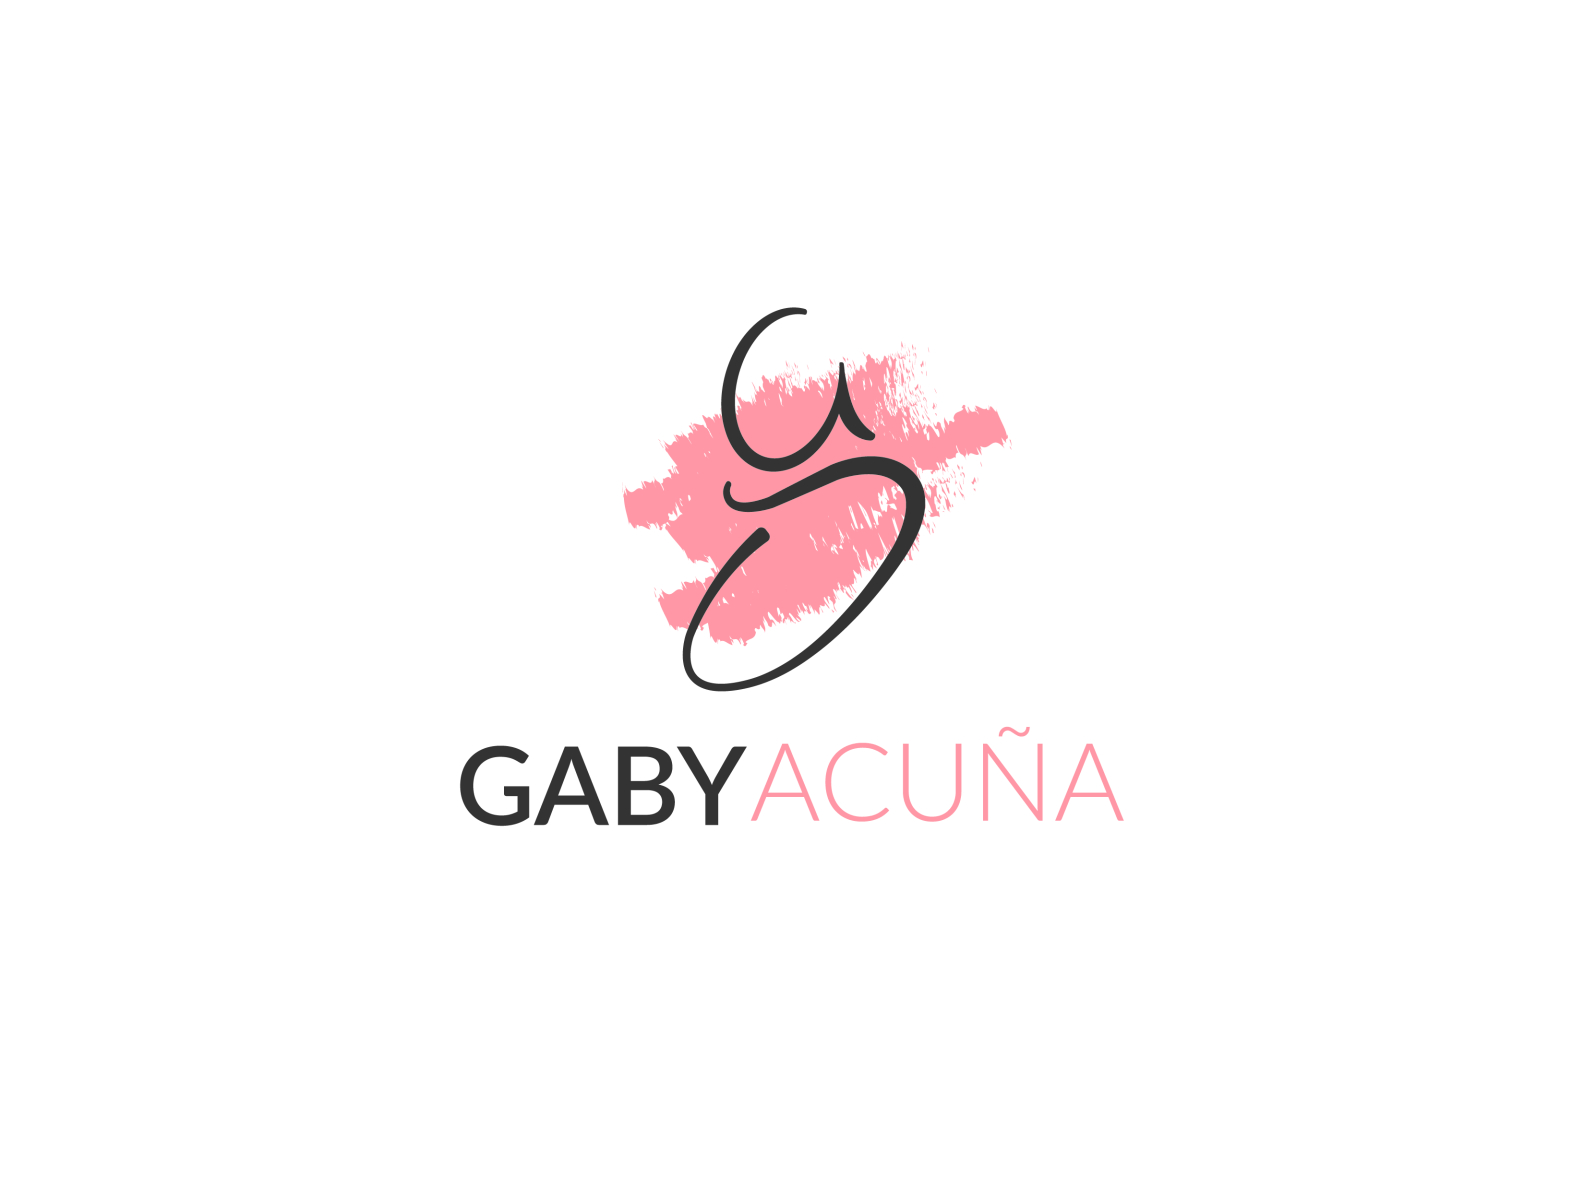 Gaby Acuña Logo (Color Version) by Cesar Messuti on Dribbble